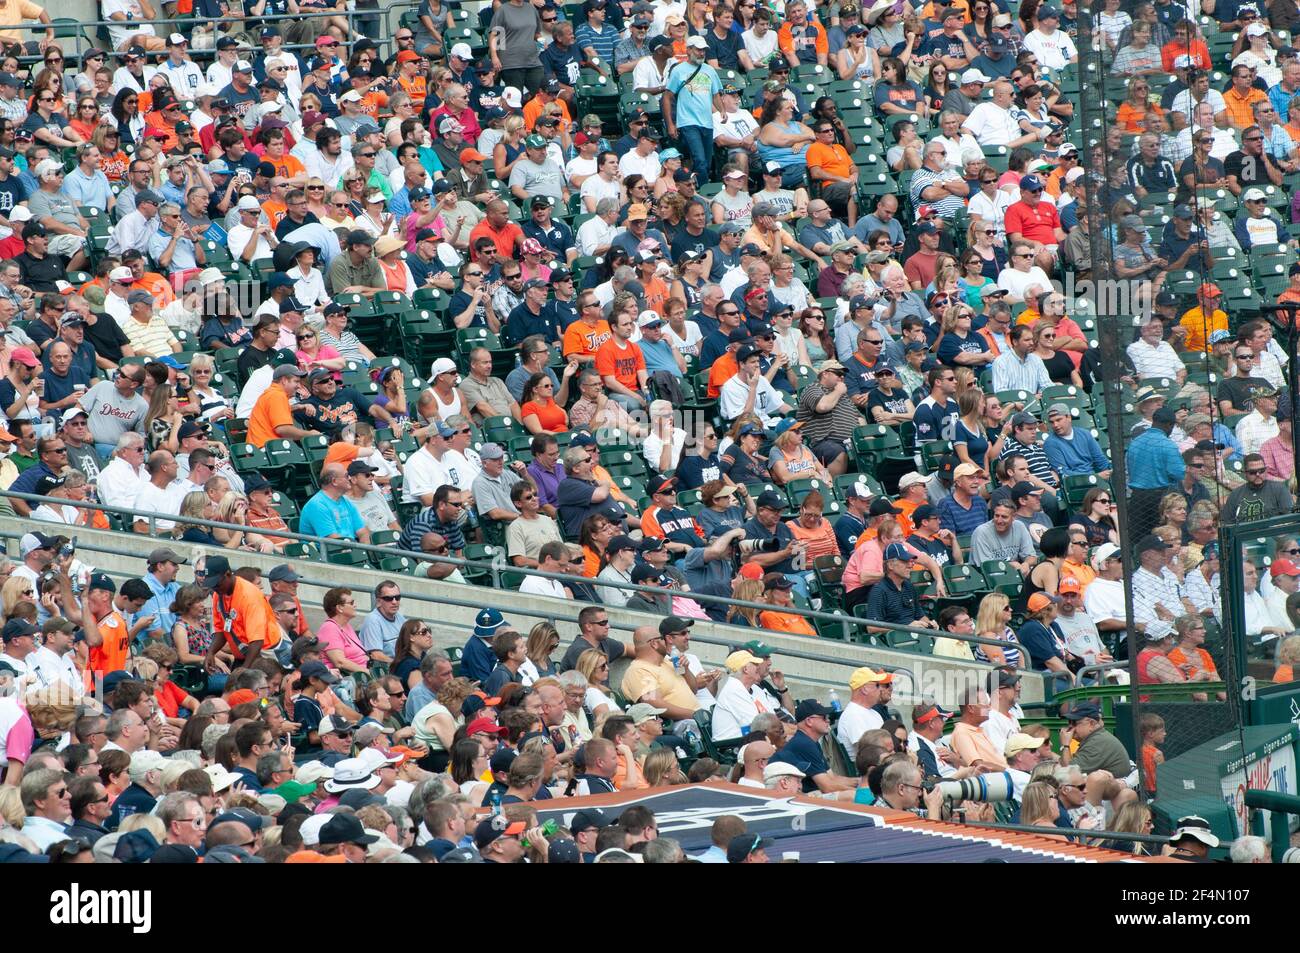 Hundreds of baseball fans in the stands of a Detroit Tigers game at Comerica Park in Detroit, Michigan Stock Photo